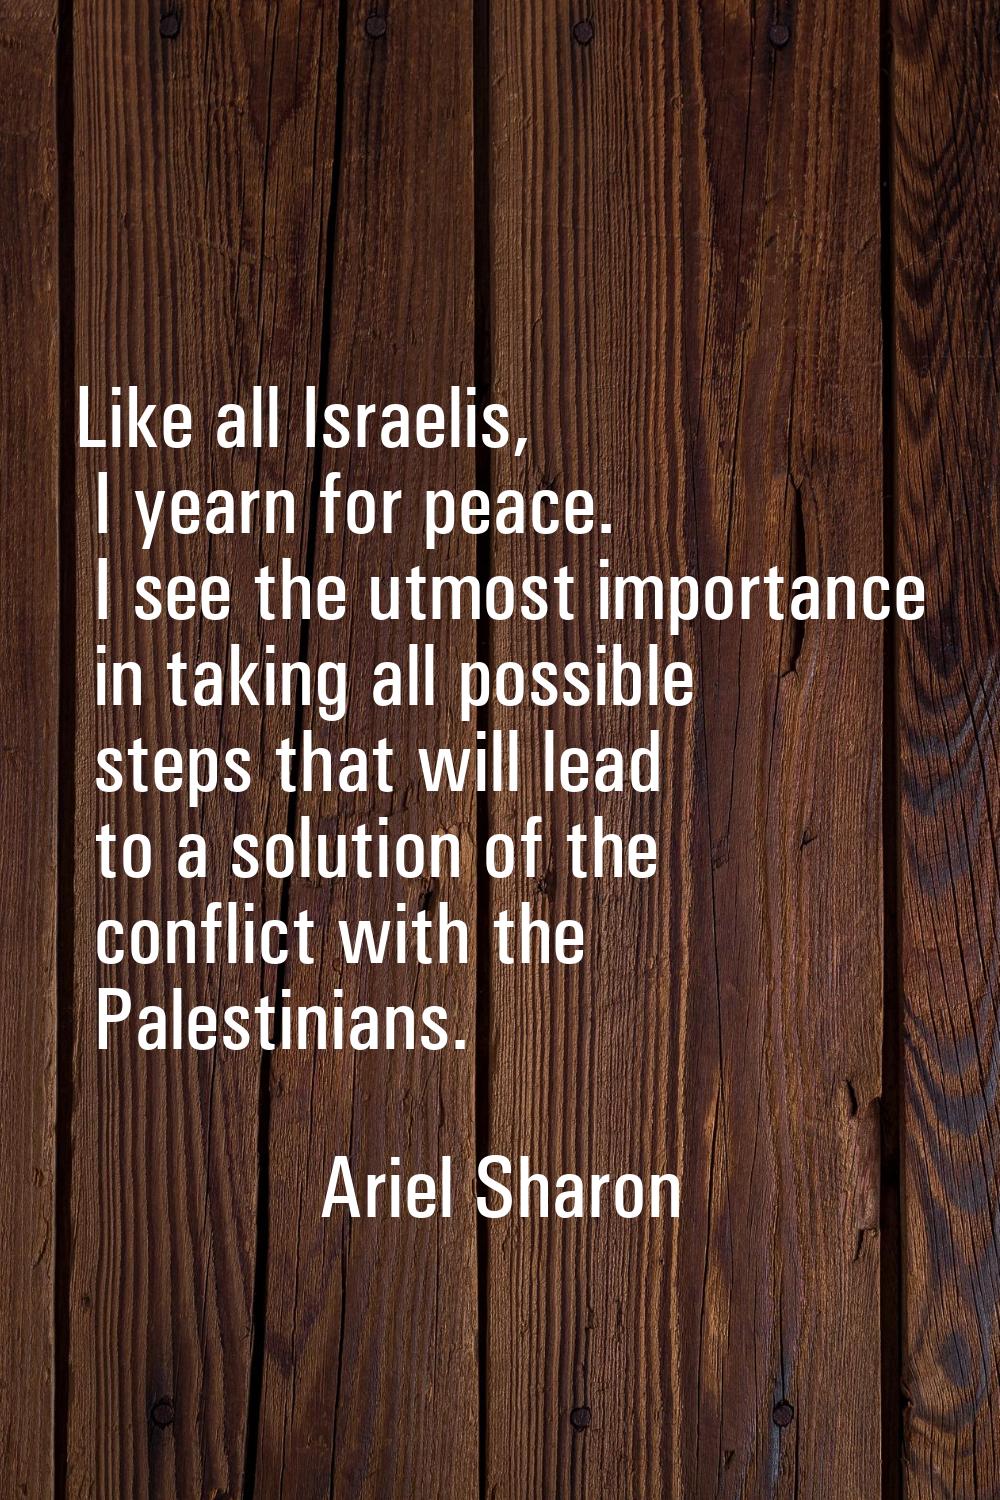 Like all Israelis, I yearn for peace. I see the utmost importance in taking all possible steps that